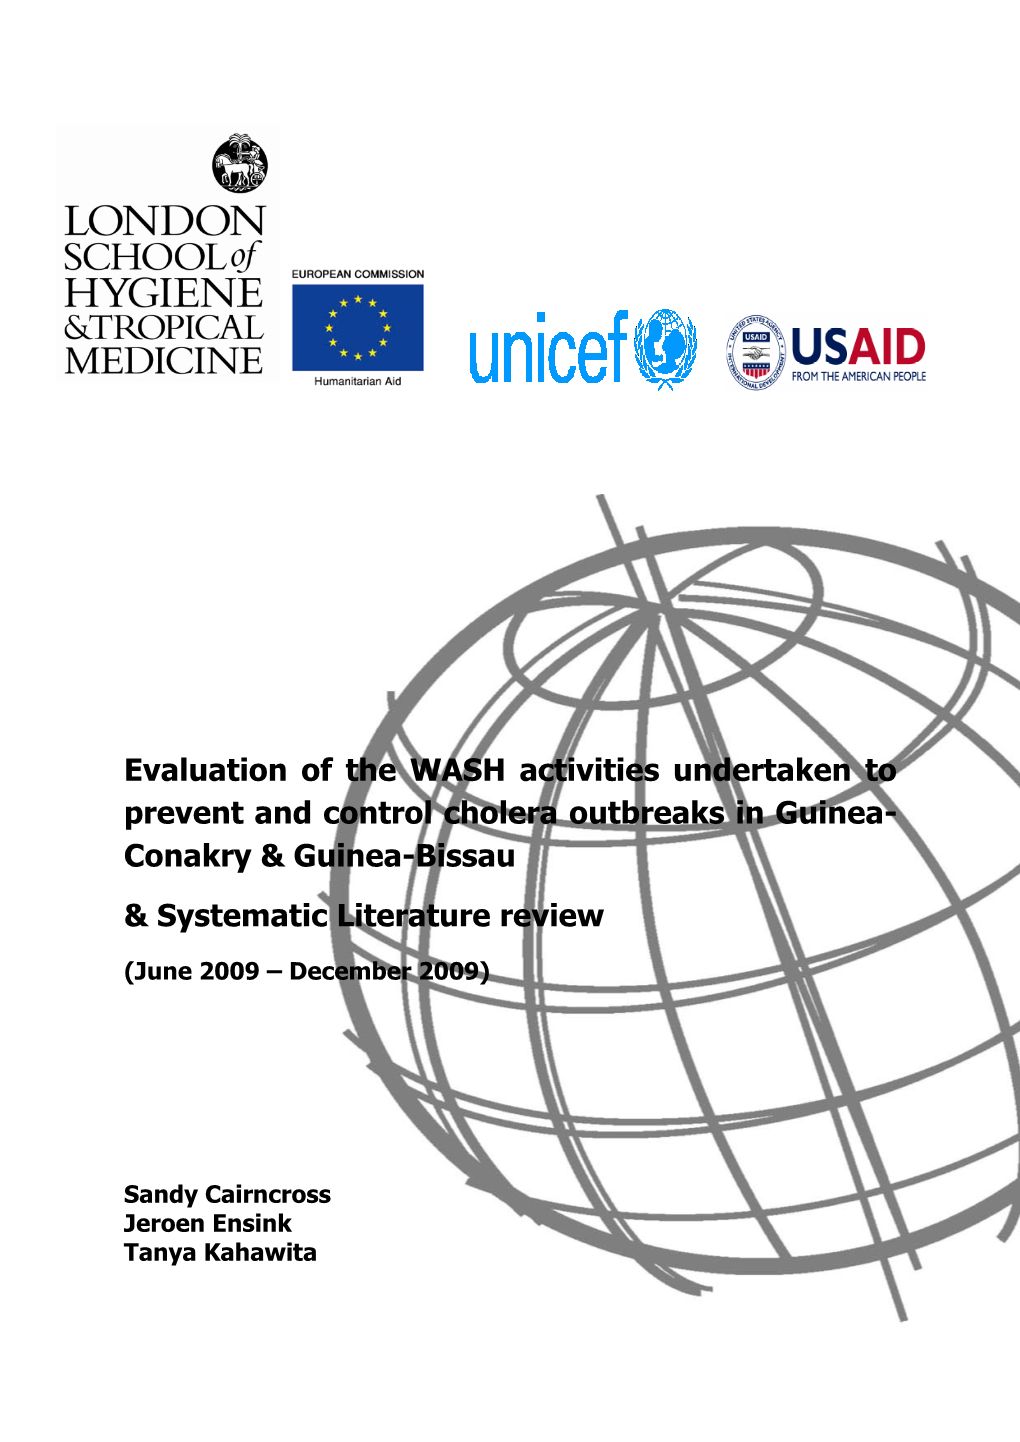 Evaluation of the WASH Activities Undertaken to Prevent and Control Cholera Outbreaks in Guinea- Conakry & Guinea-Bissau & Systematic Literature Review